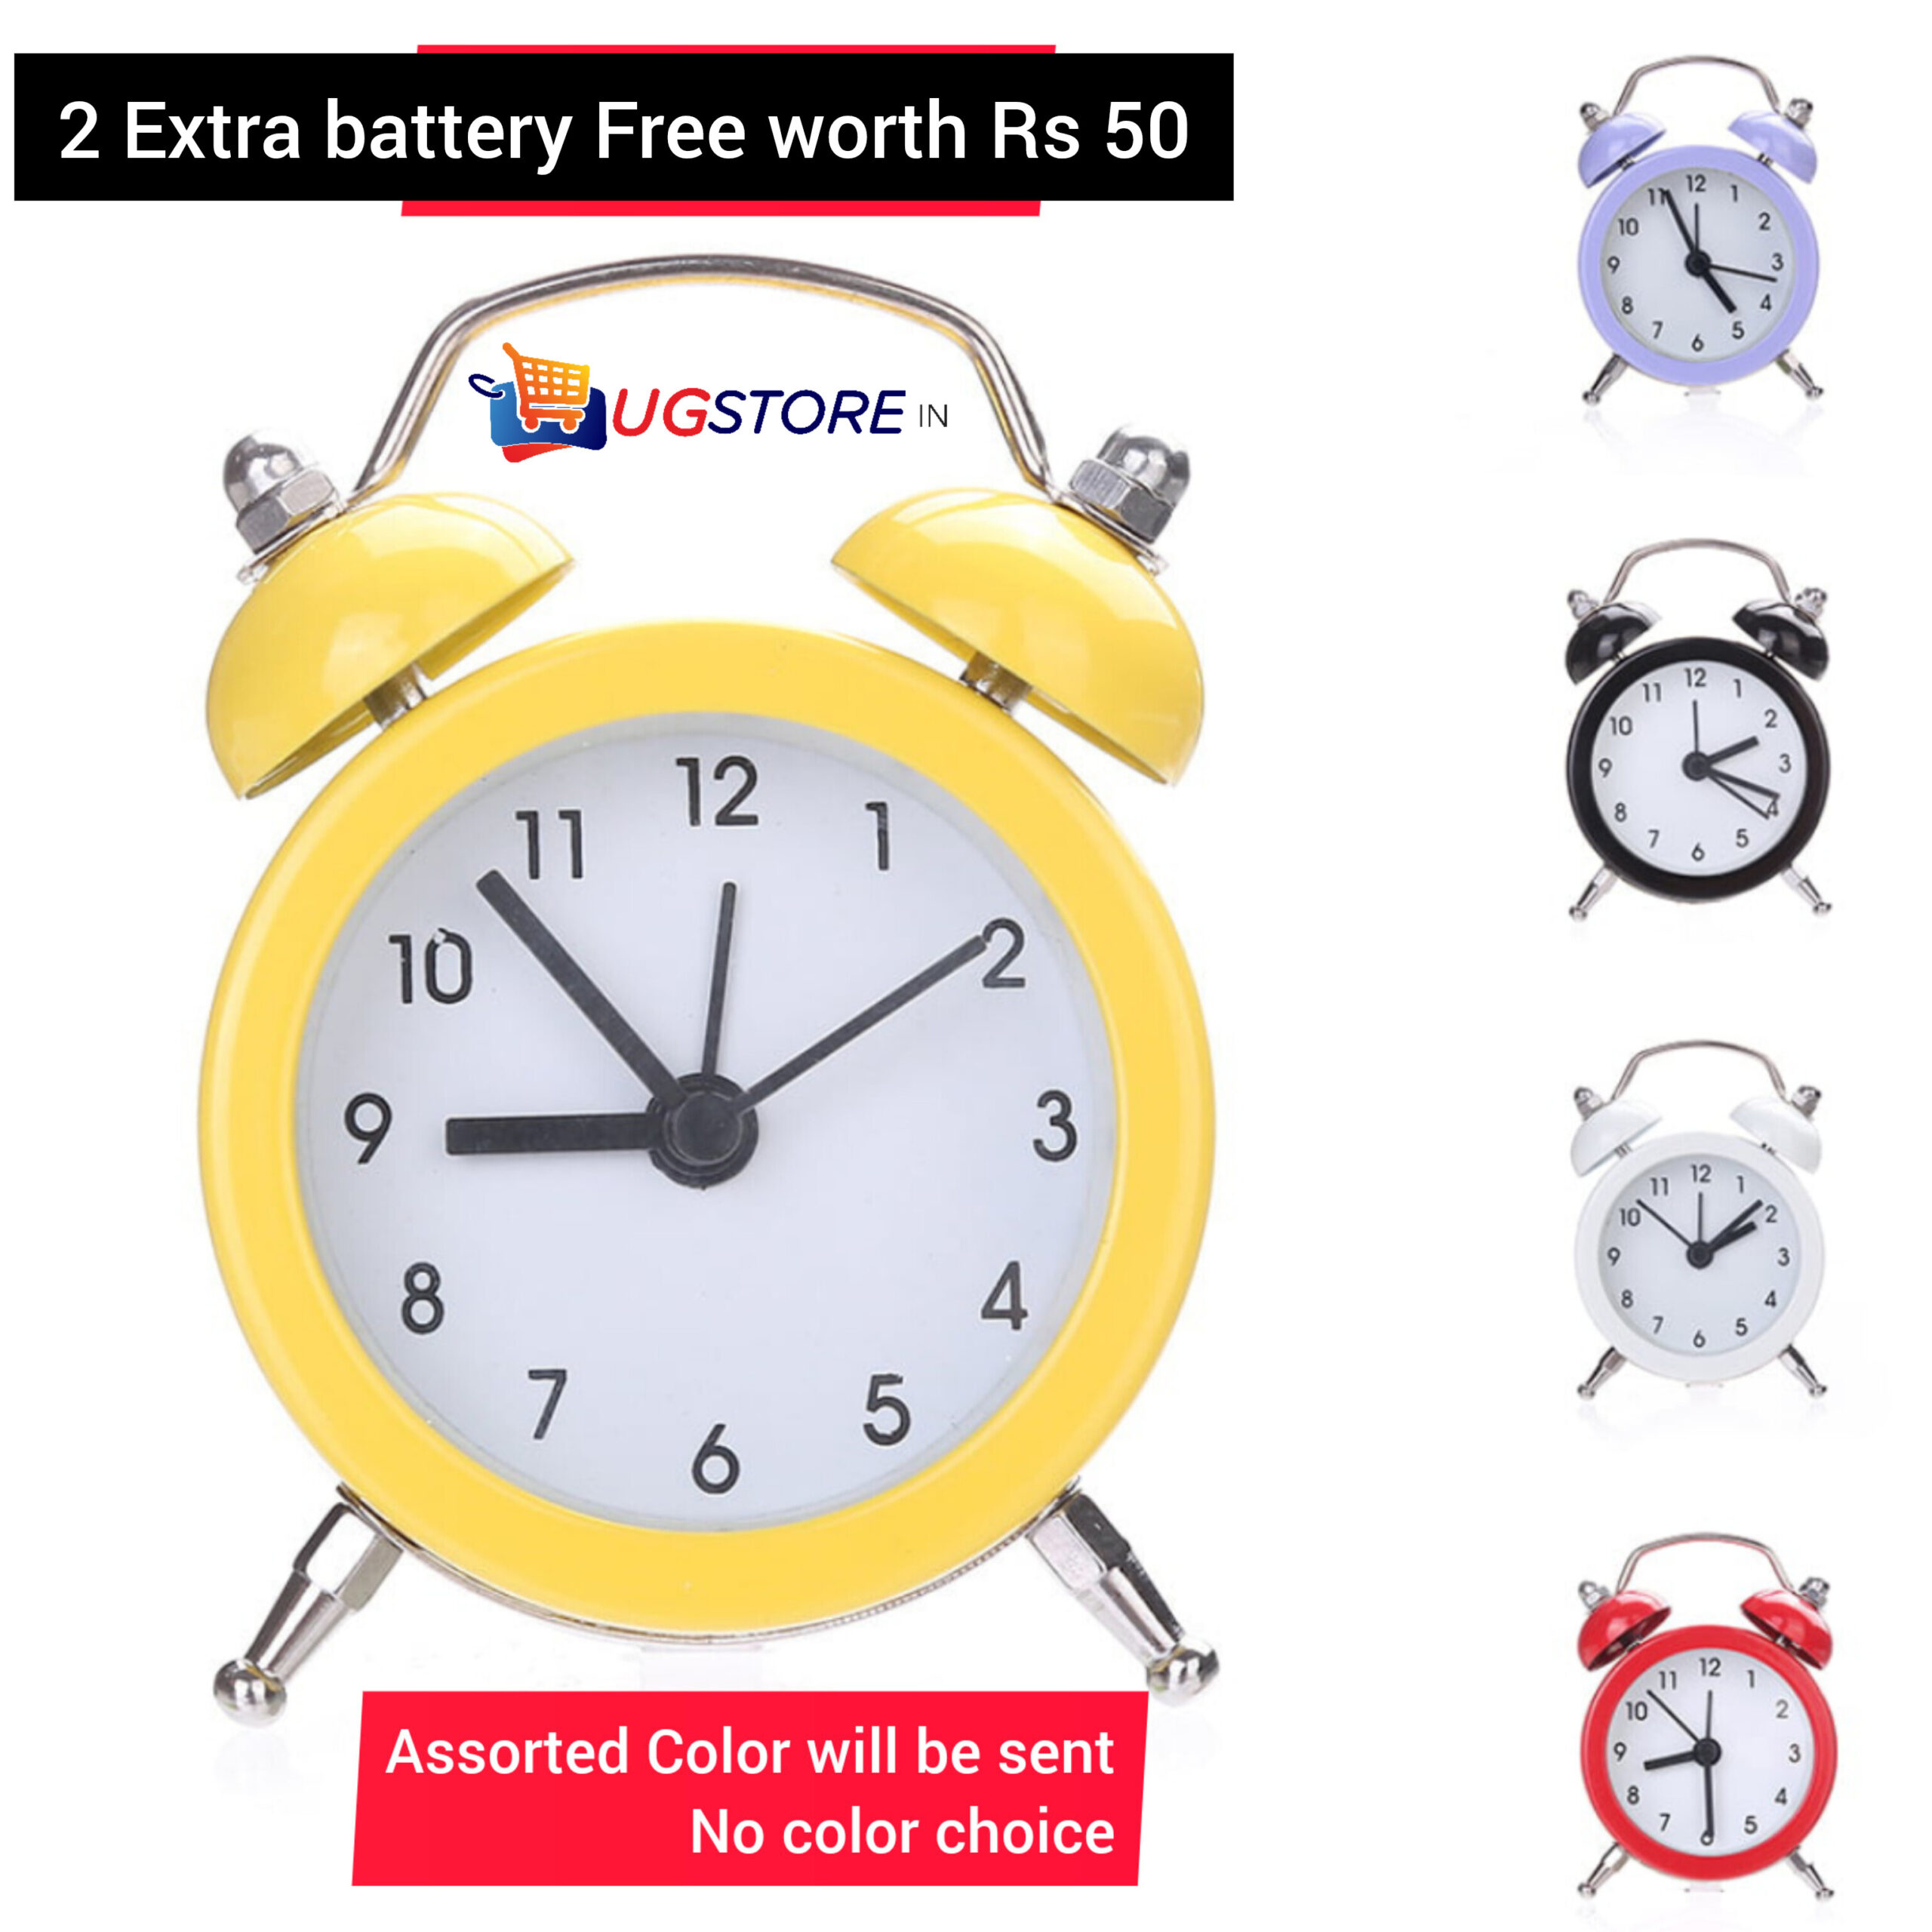 UGSTORE Mini Round Metal Alarm Clock Desk Stand Clock for Home Room Kitchen Office – Assorted Color – 2 extra battery free